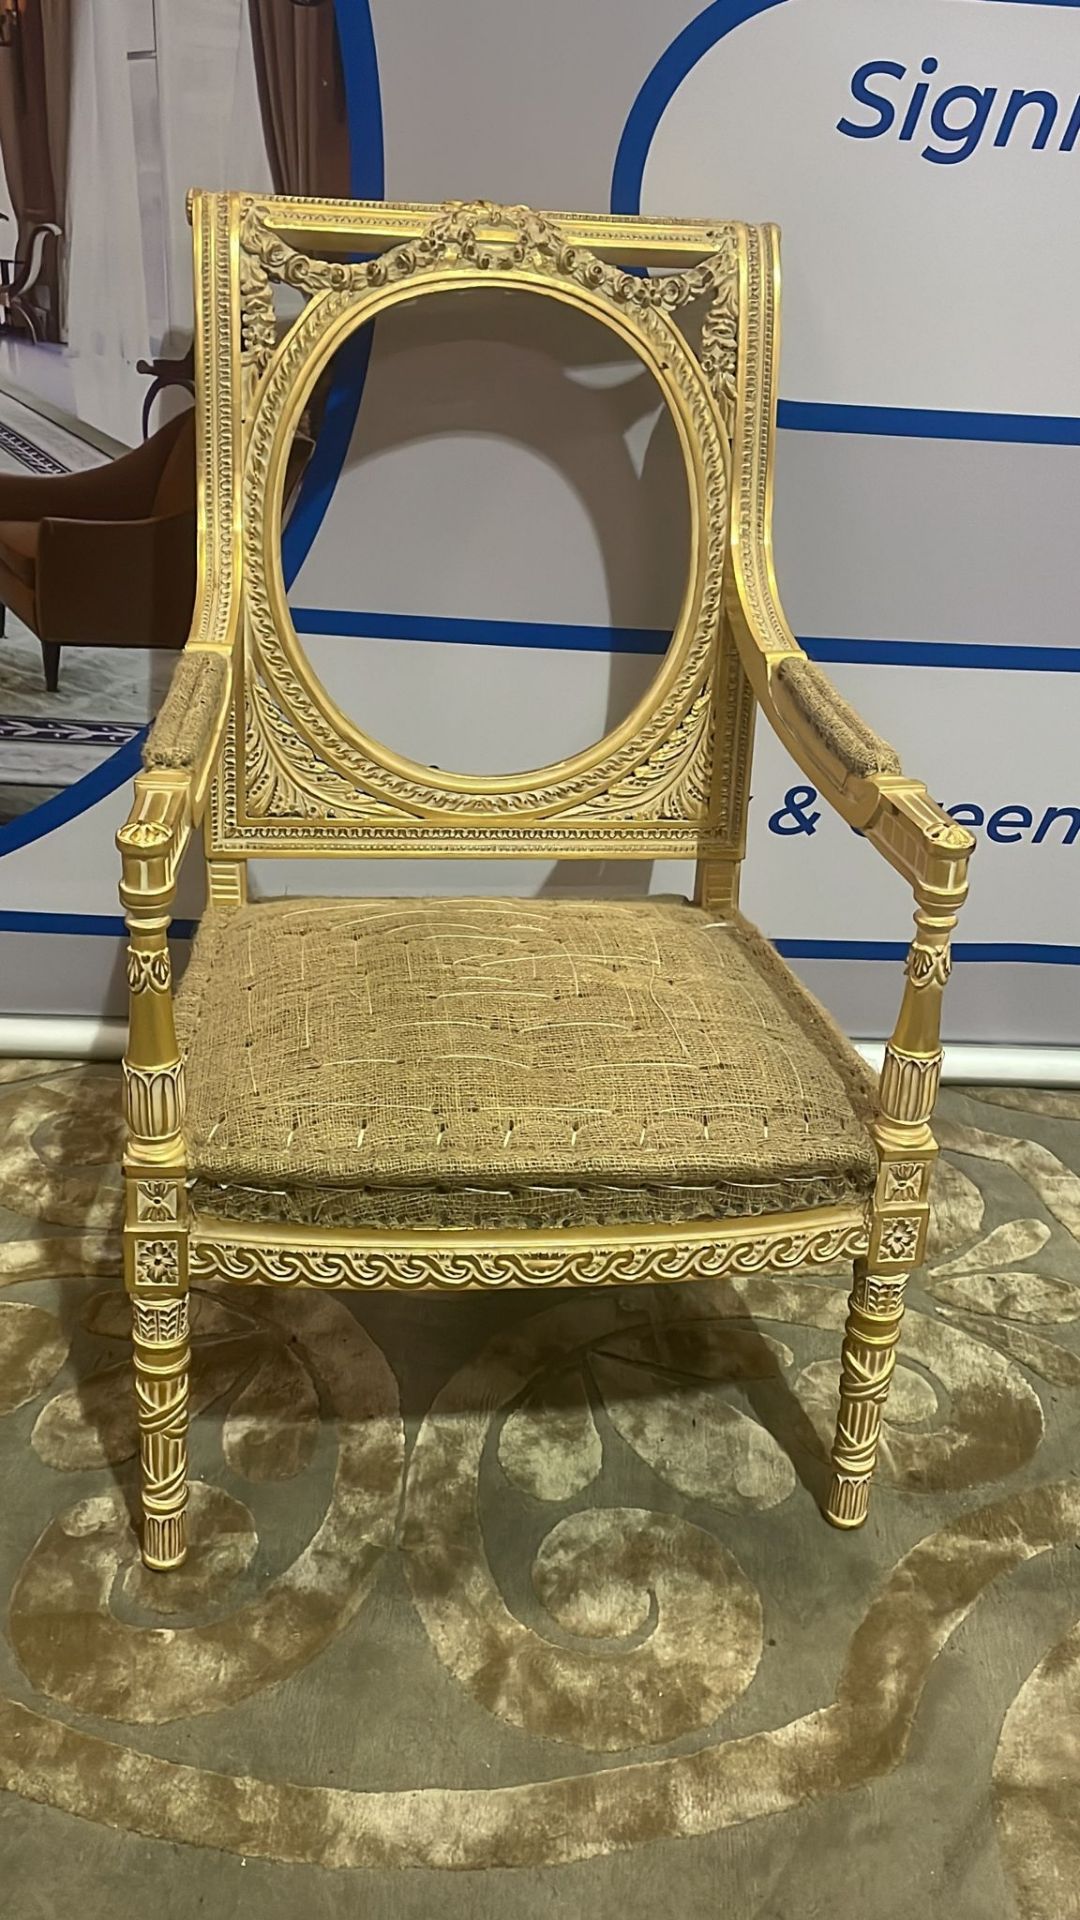 Gold Showood Armchair Frame Ornate Carving Ready For Upholstery Completion 55 x 62 x 102cm